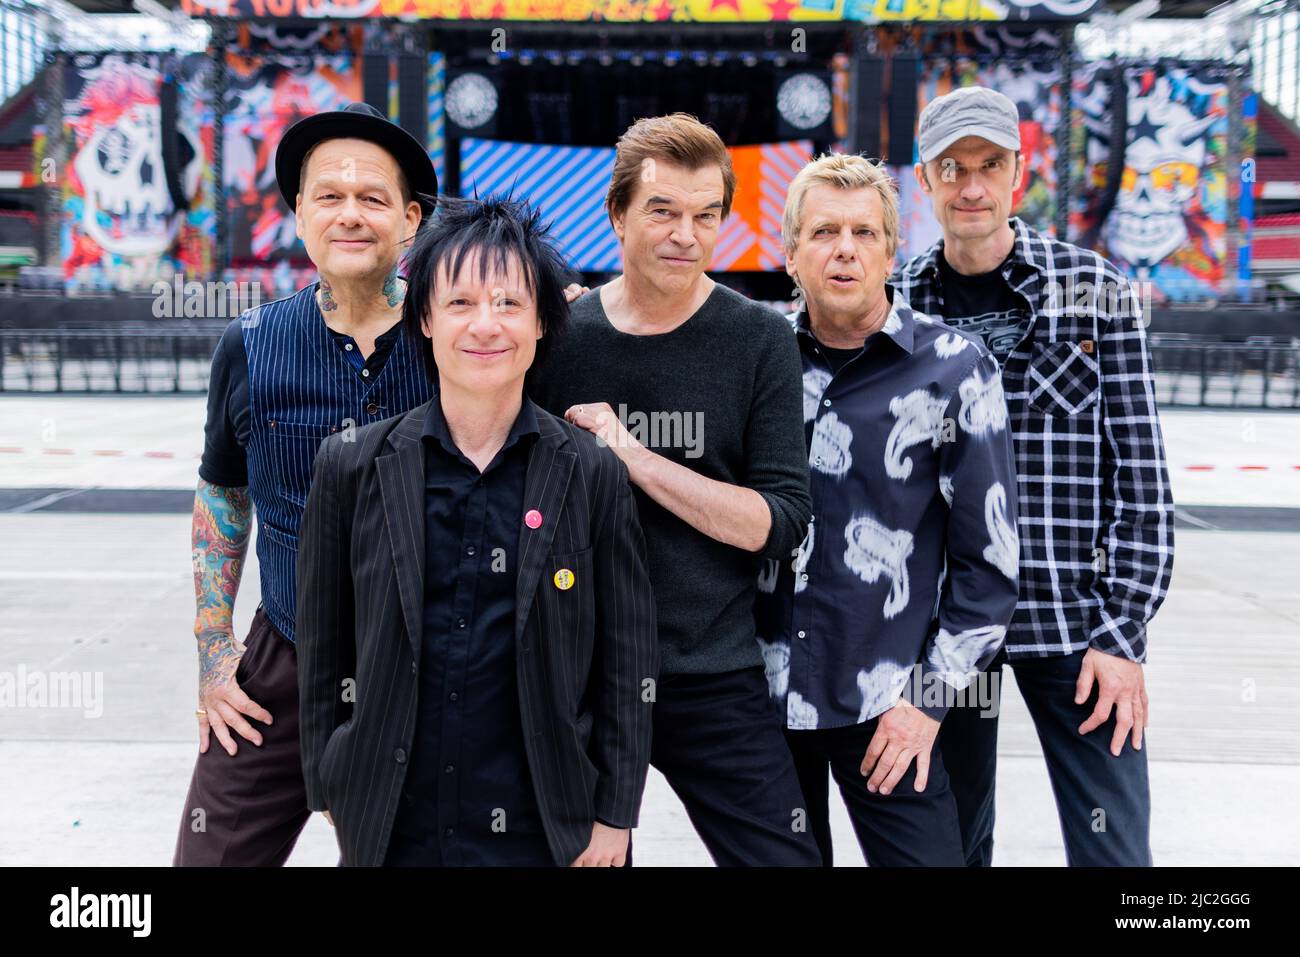 Cologne, Germany. 09th June, 2022. Campino (M, civil name: Andreas Frege),  singer of the punk band "Die Toten Hosen", Andreas von Holst (l, Kuddel),  Michael Breitkopf (r, Breiti), Andreas Meurer (Andi) and